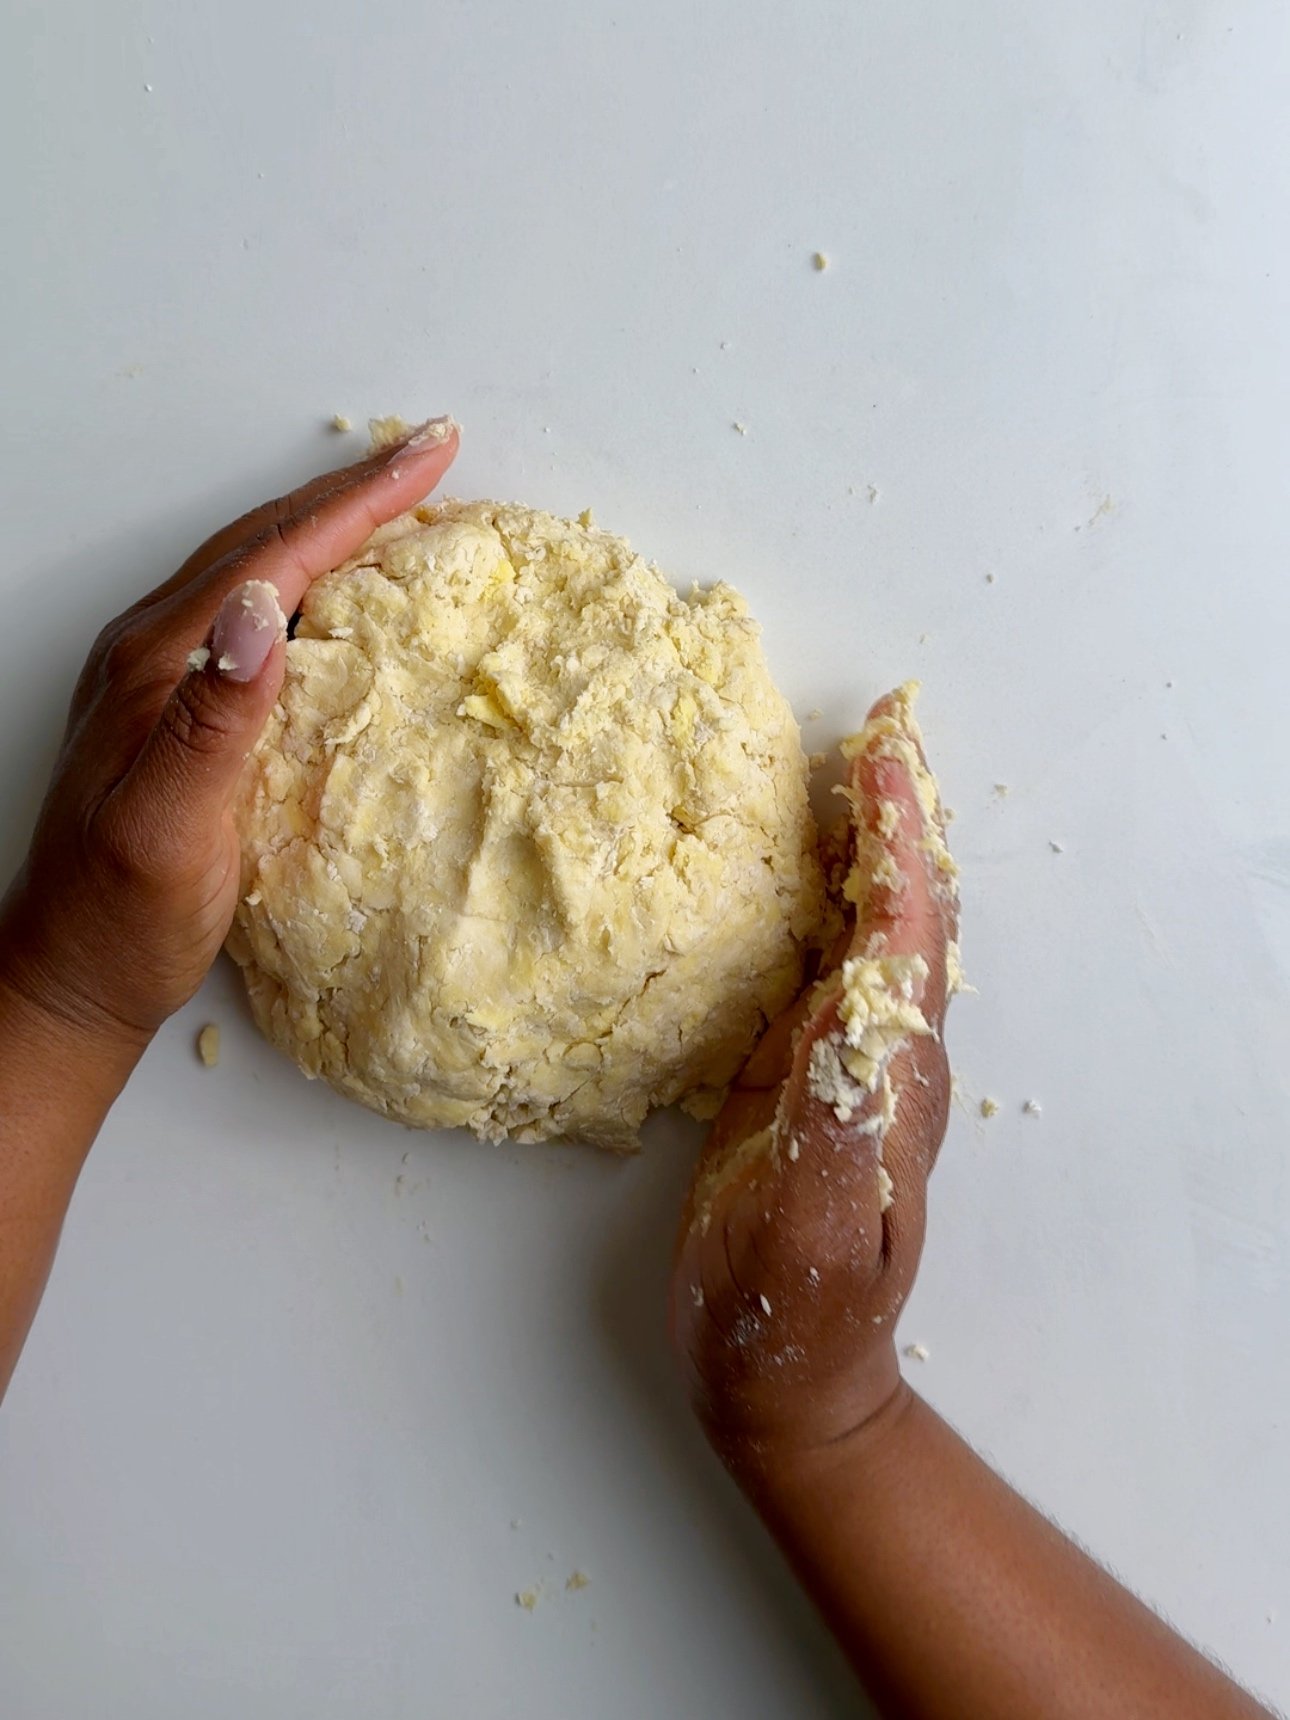 Forming the pastry dough into a ball